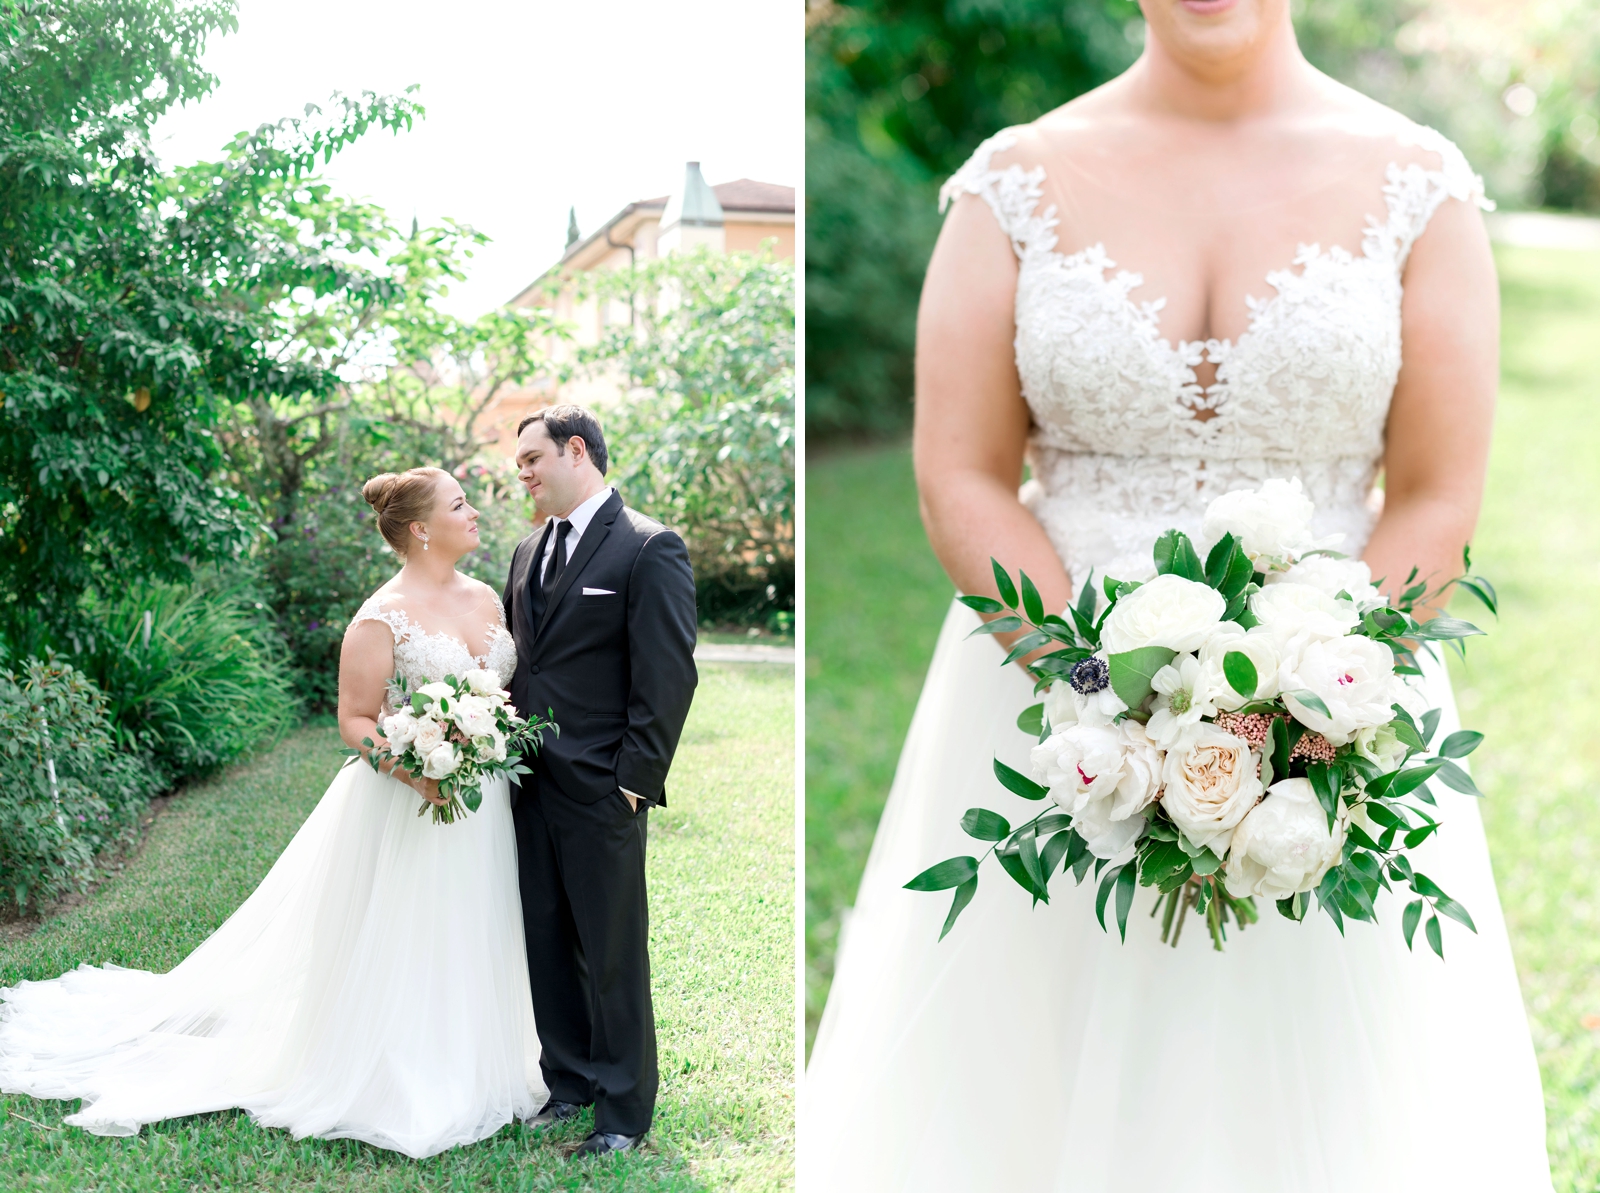 Bluegrass Chic - Blush and White Bridal Bouquet